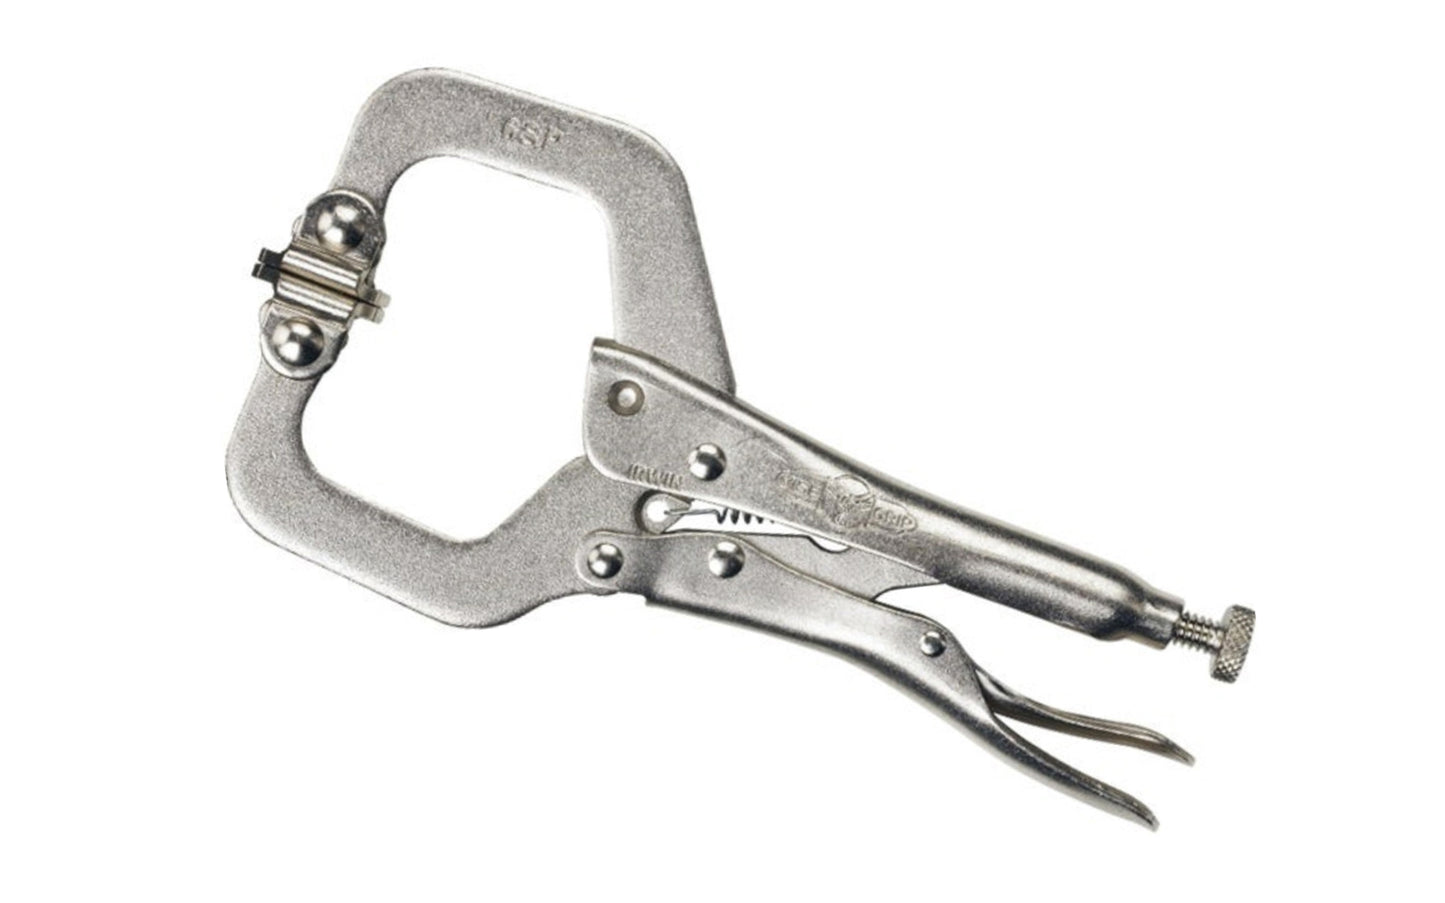 Irwin 6" "The Original" Vise Grip Locking C-Clamp Plier. Model 6SP. Item No. 18. Turn screw to adjust pressure and fit work. Stays adjusted for repetitive use. Constructed of high-grade heat-treated alloy steel for maximum toughness & durability. 2-1/8" Jaw Capacity.